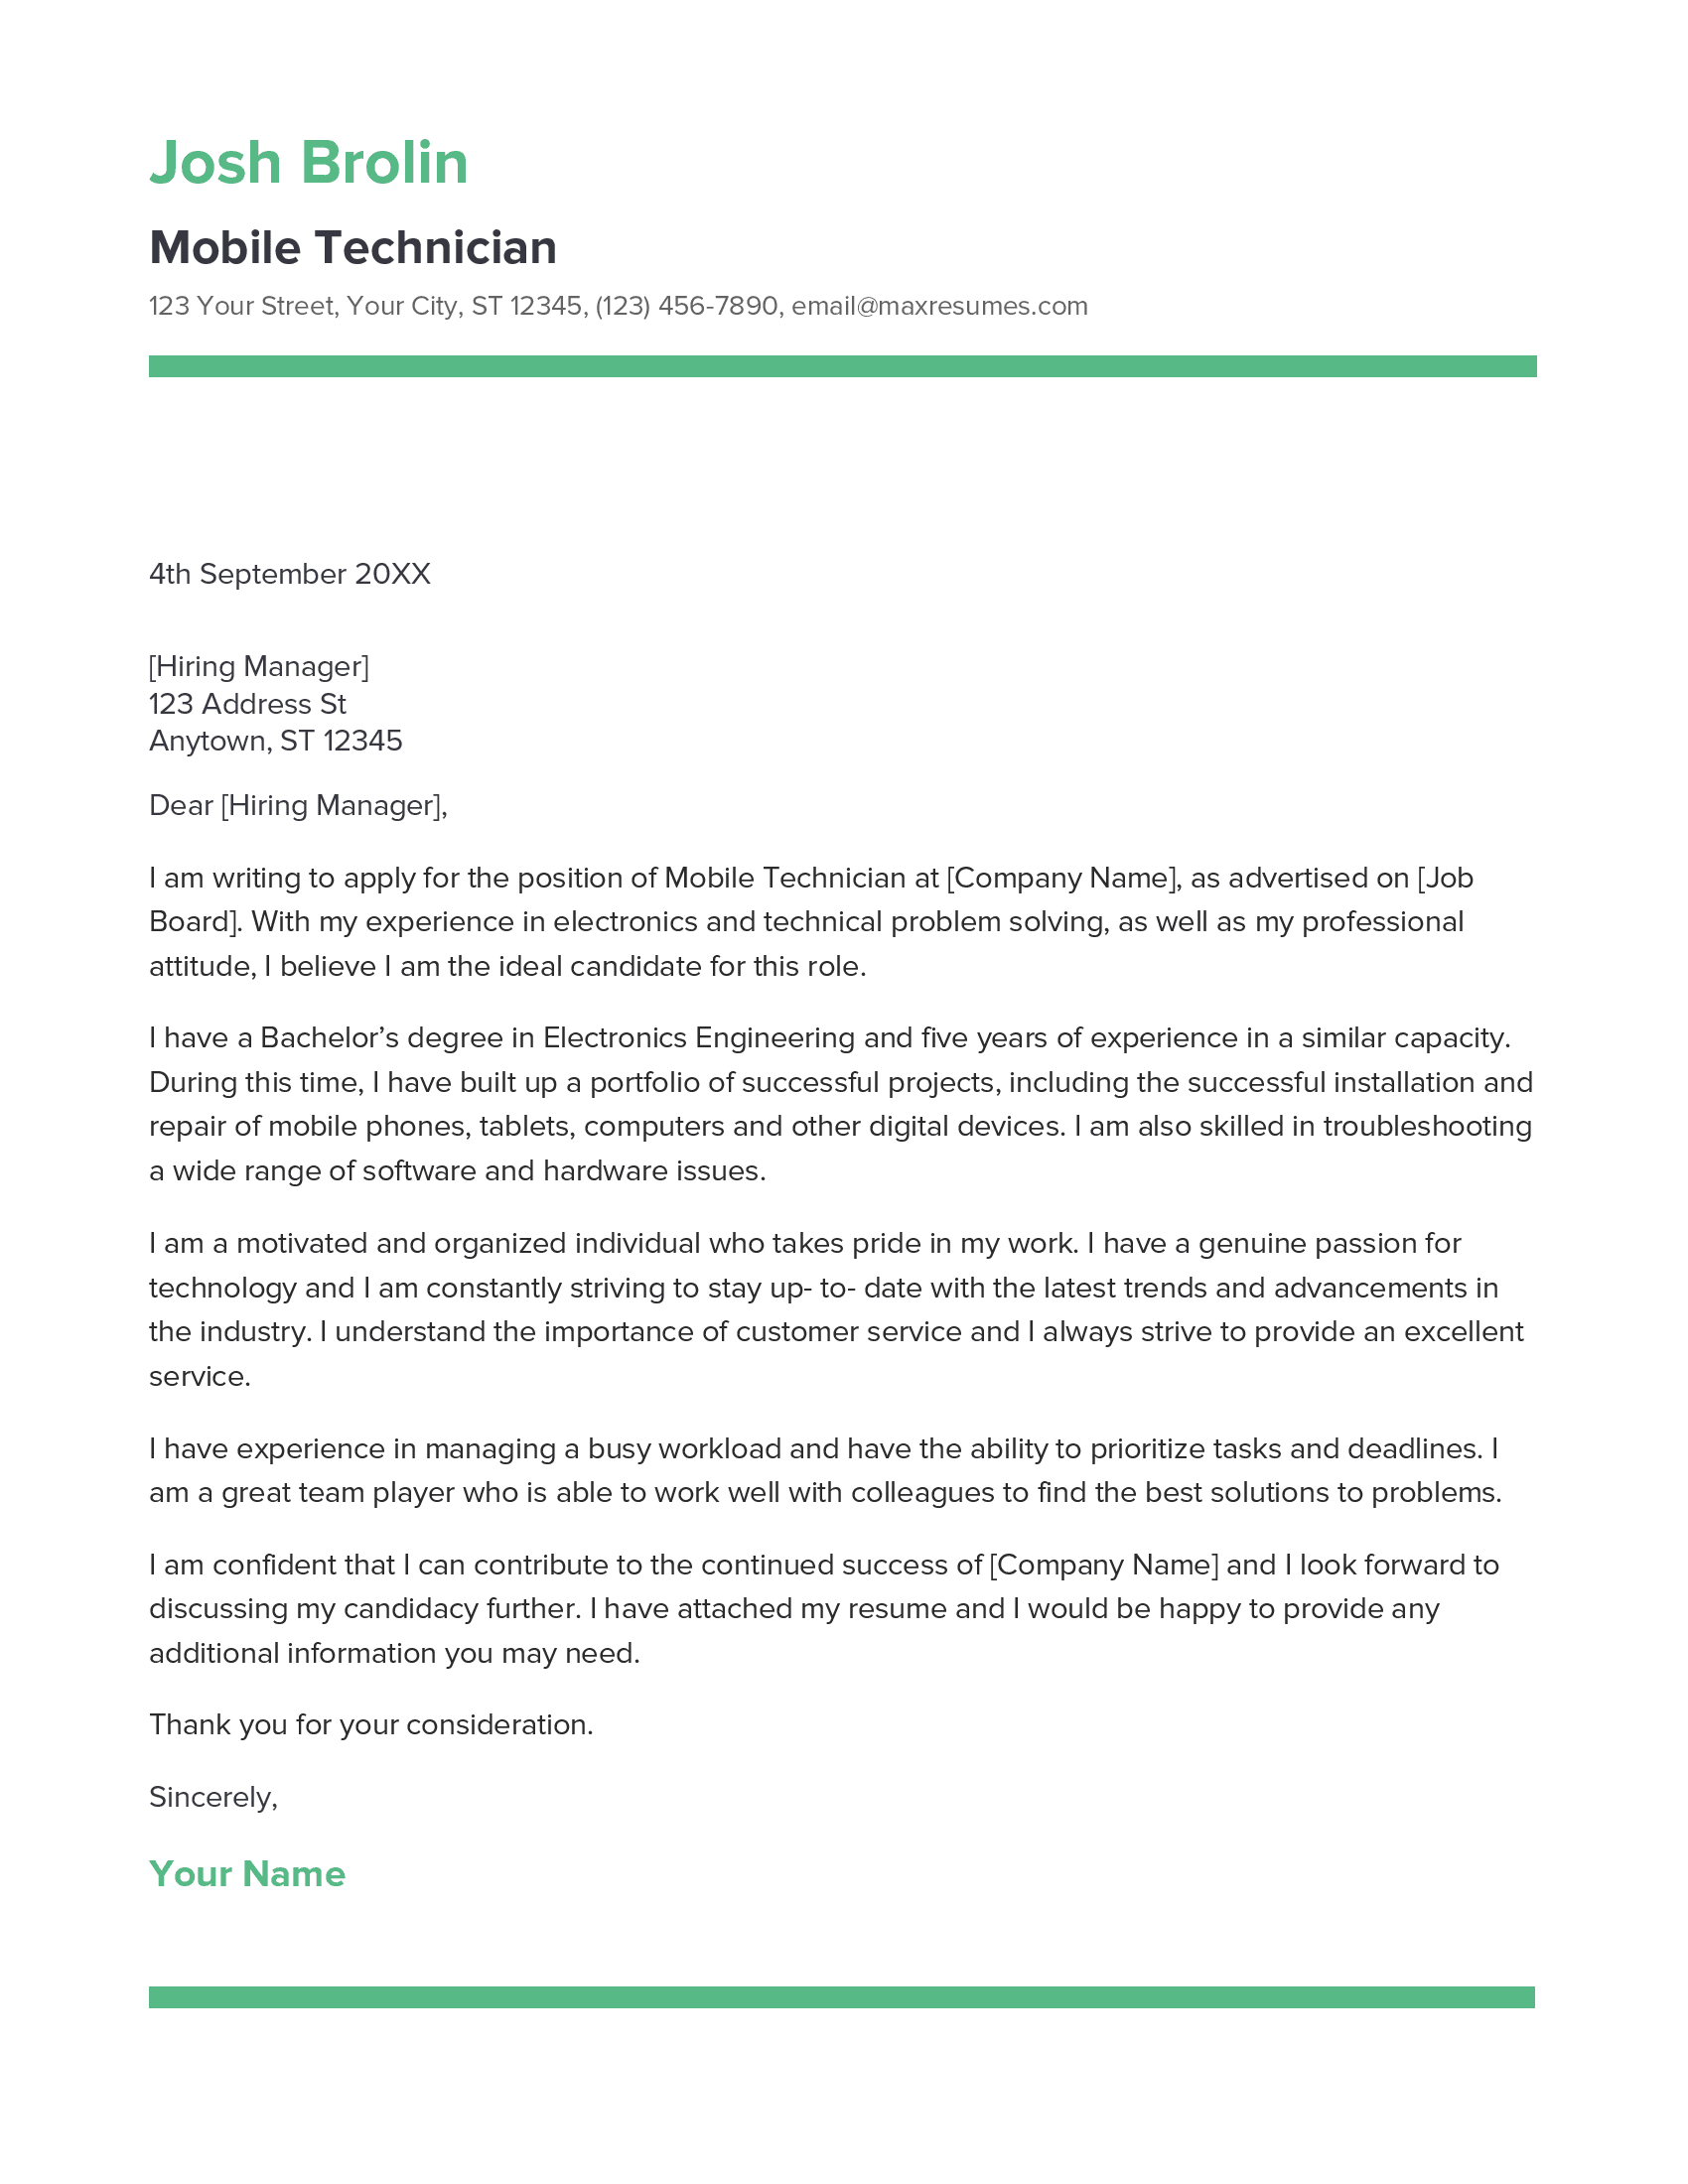 Mobile Technician Cover Letter Example